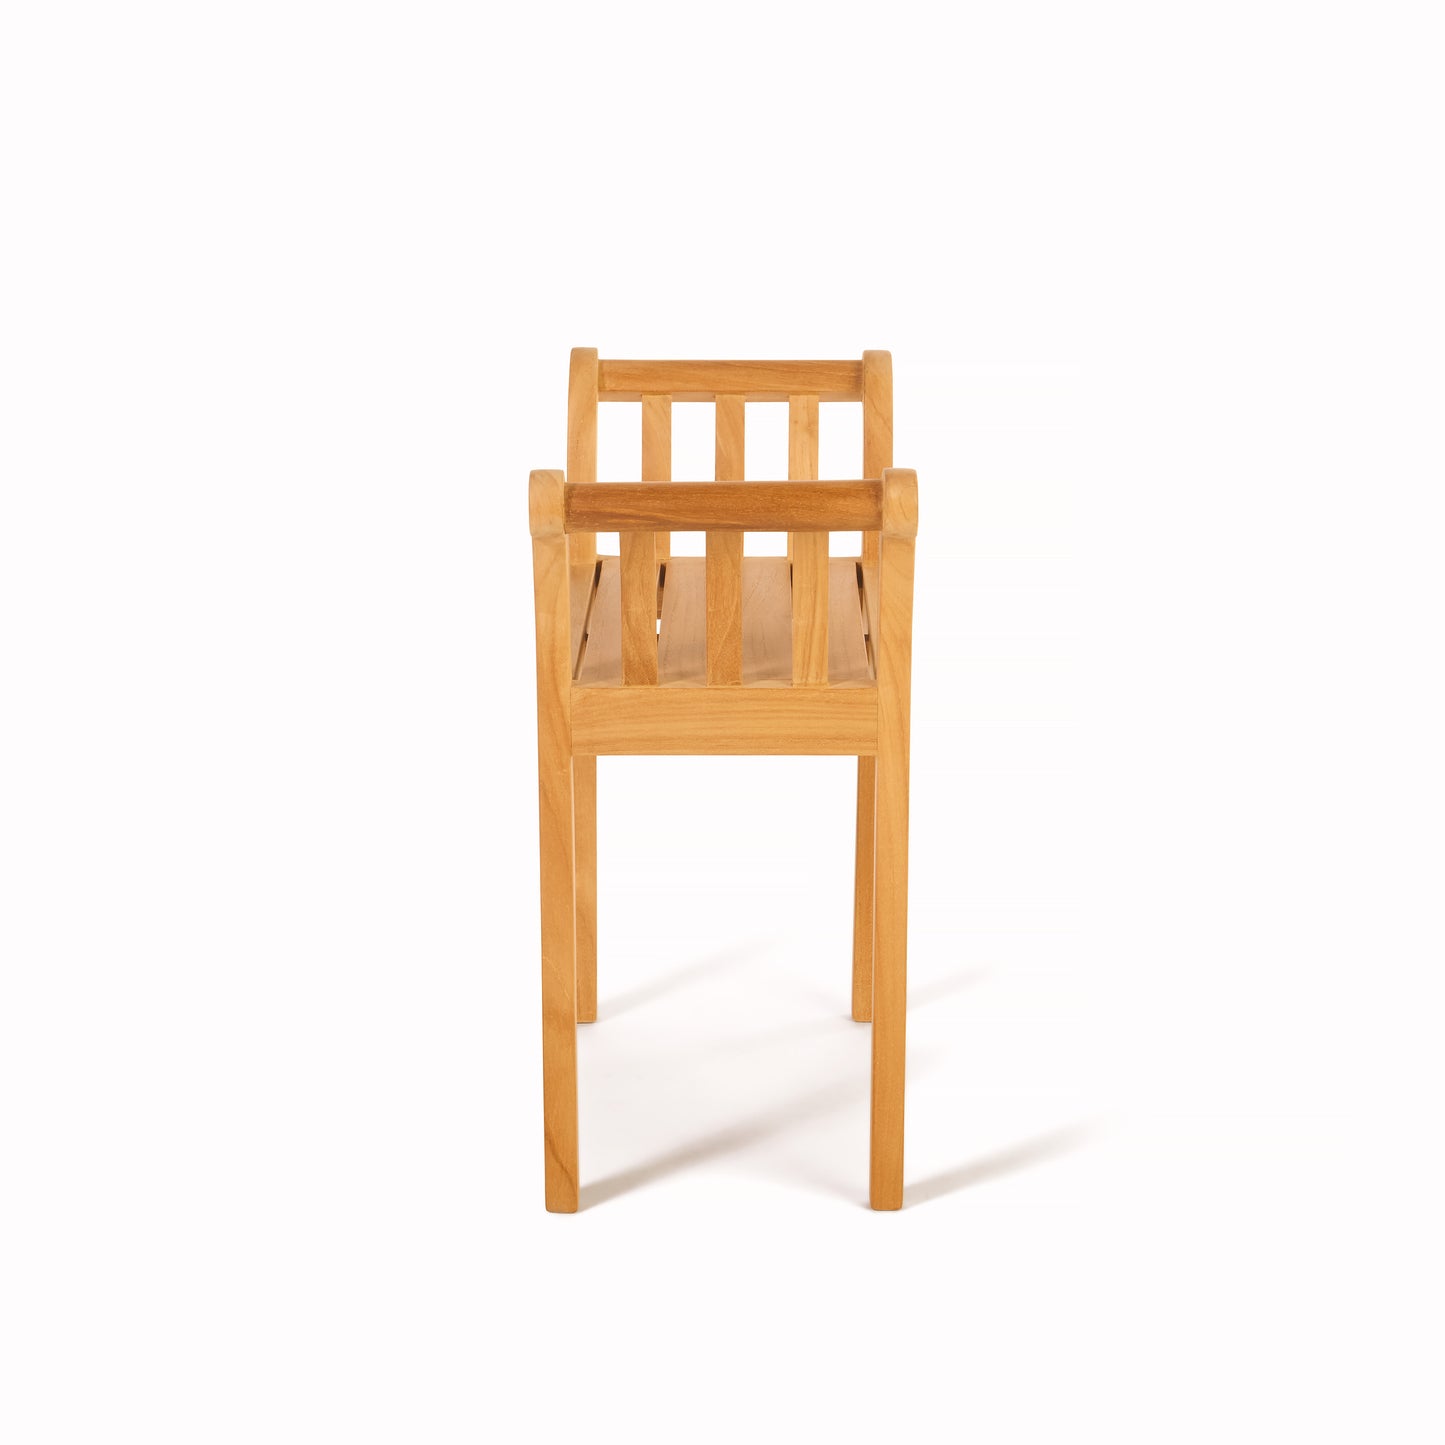 Teak Backless Bench-Stool Empire with Handles